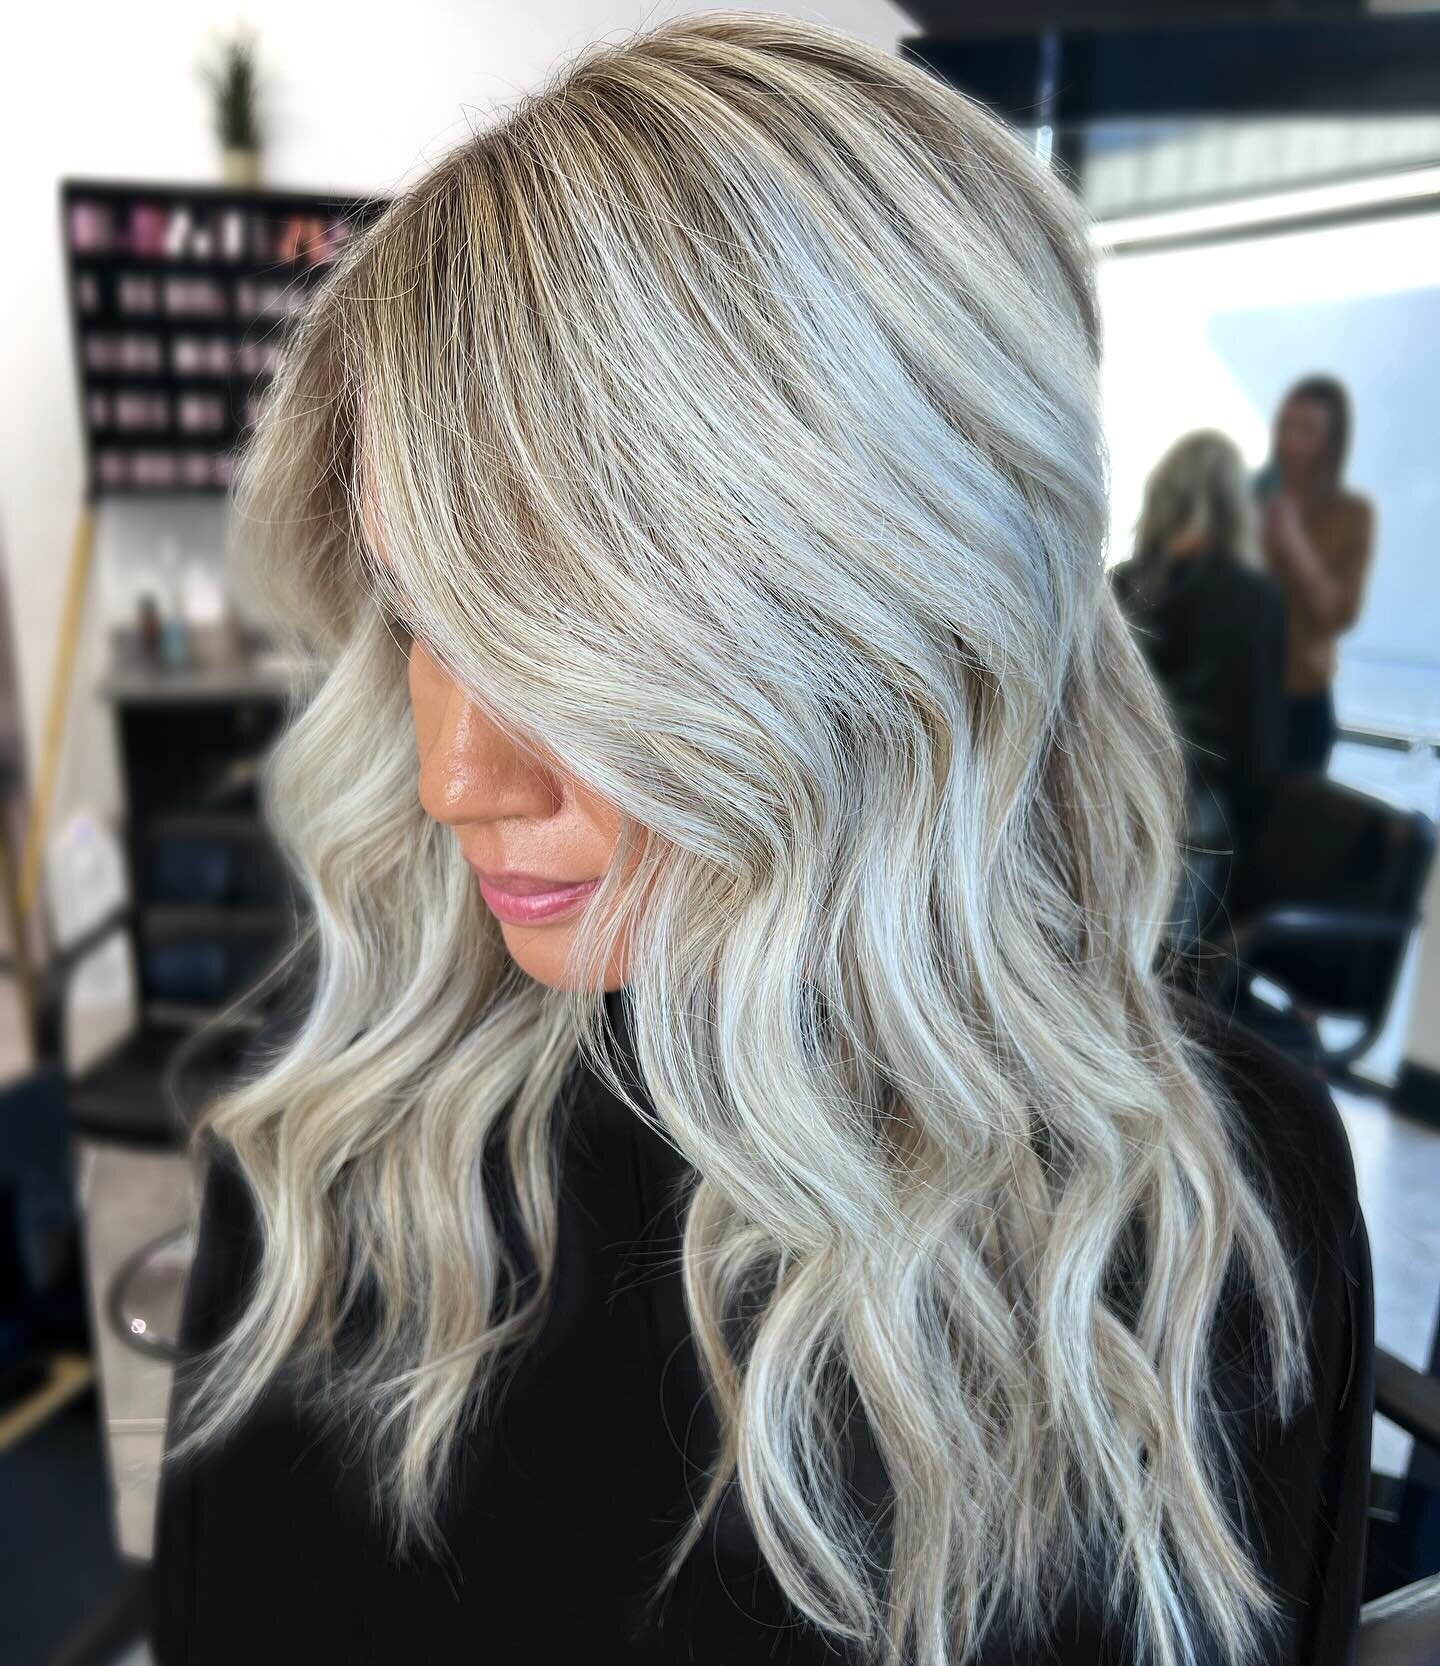 4 ways to keep your hair looking healthy &amp; salon worthy! 💁🏼&zwj;♀️

1. Make your next salon appointment BEFORE you leave the salon. This is so important! Life gets busy and time flies by&hellip; before we know it the leaves are changing and PSL